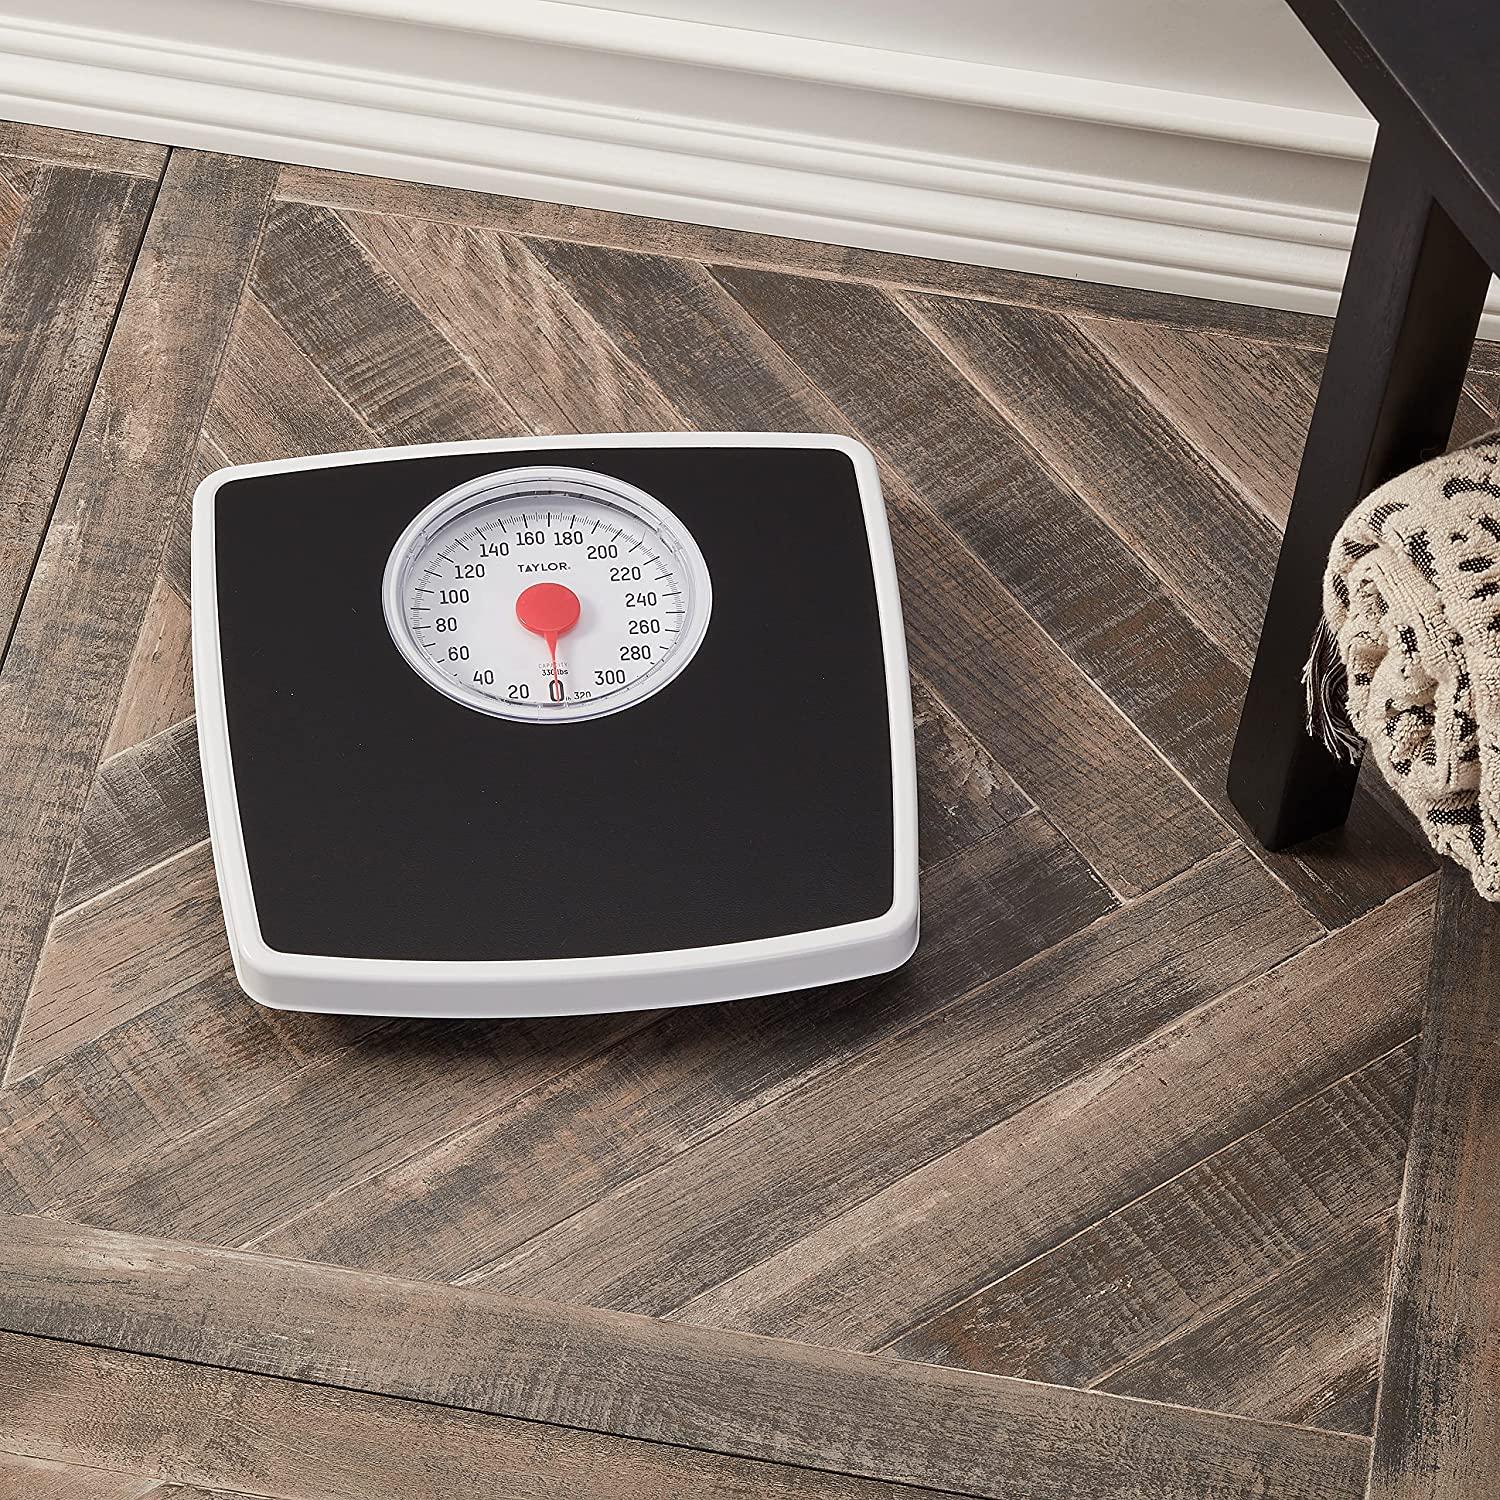  Taylor Mechanical Kitchen Weighing Food Scale Weighs